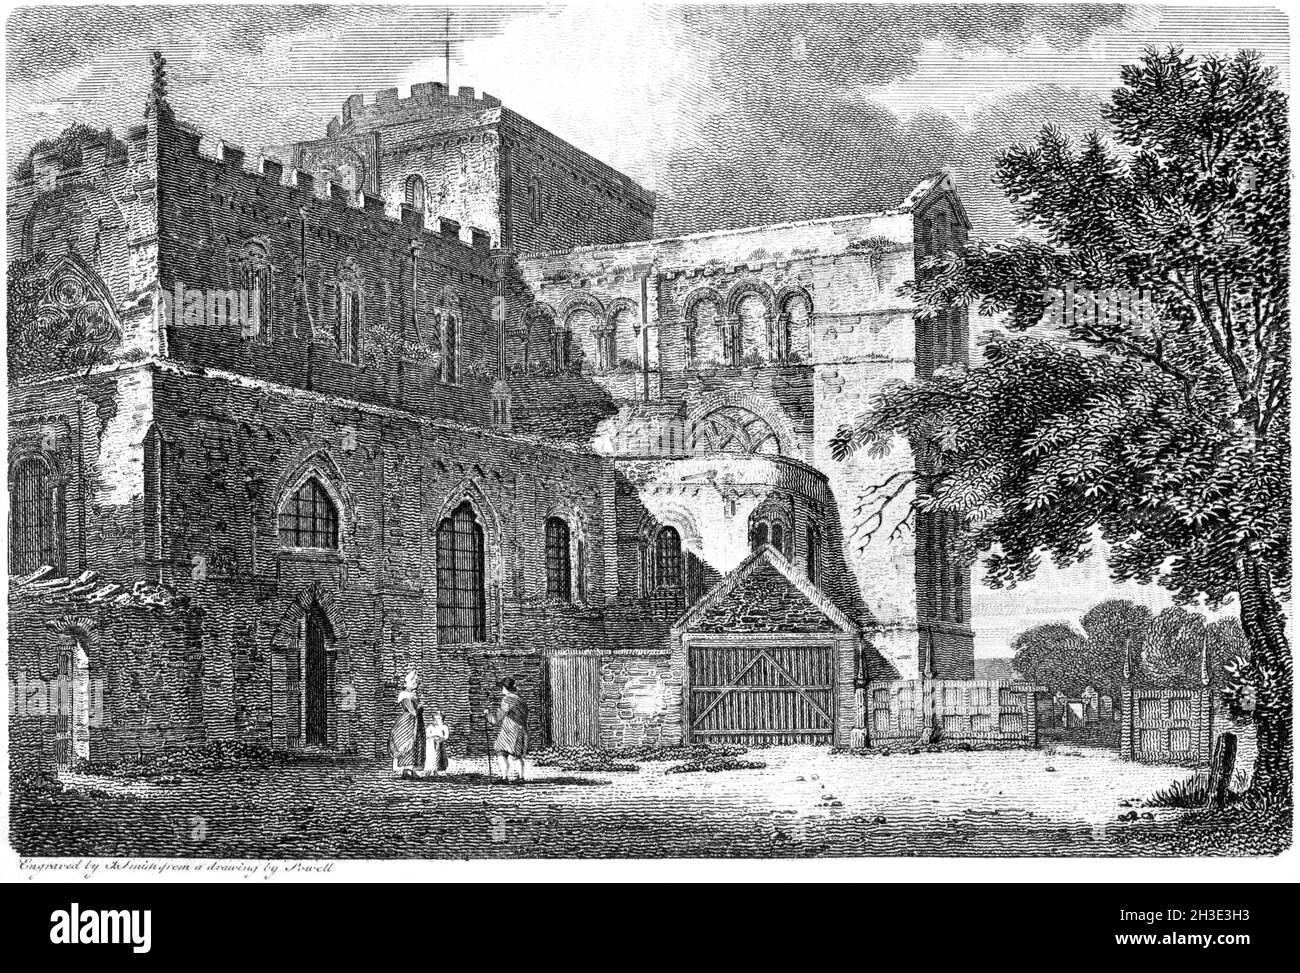 An engraving of Rumsey Church (Romsey Abbey), Hampshire UK scanned at high resolution from a book printed in 1812.  Believed copyright free. Stock Photo